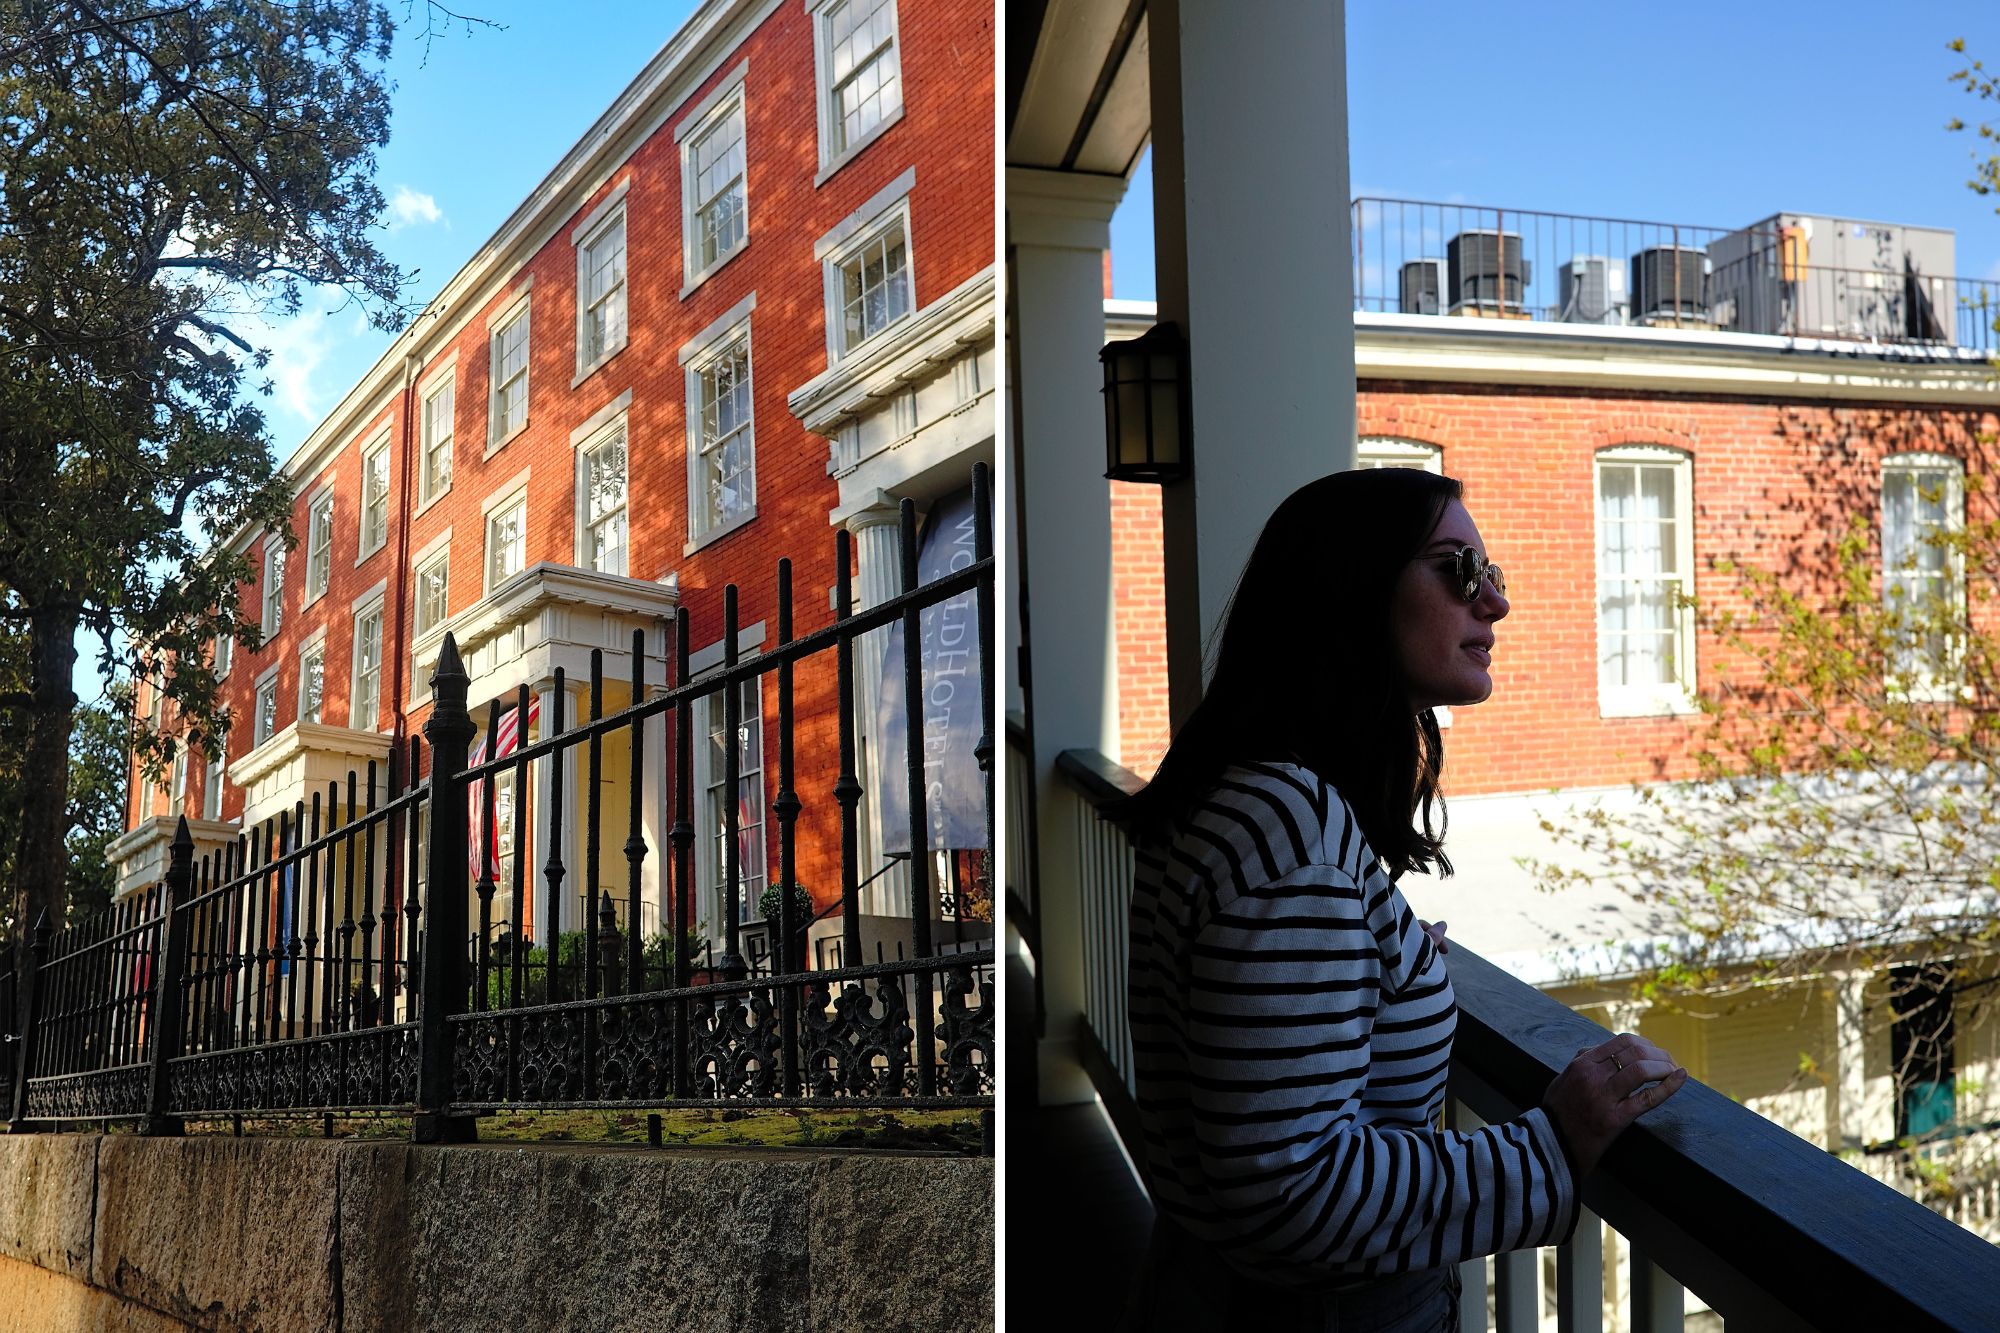 Two images: Linden Row Inn row houses and Alyssa looking out over the railing